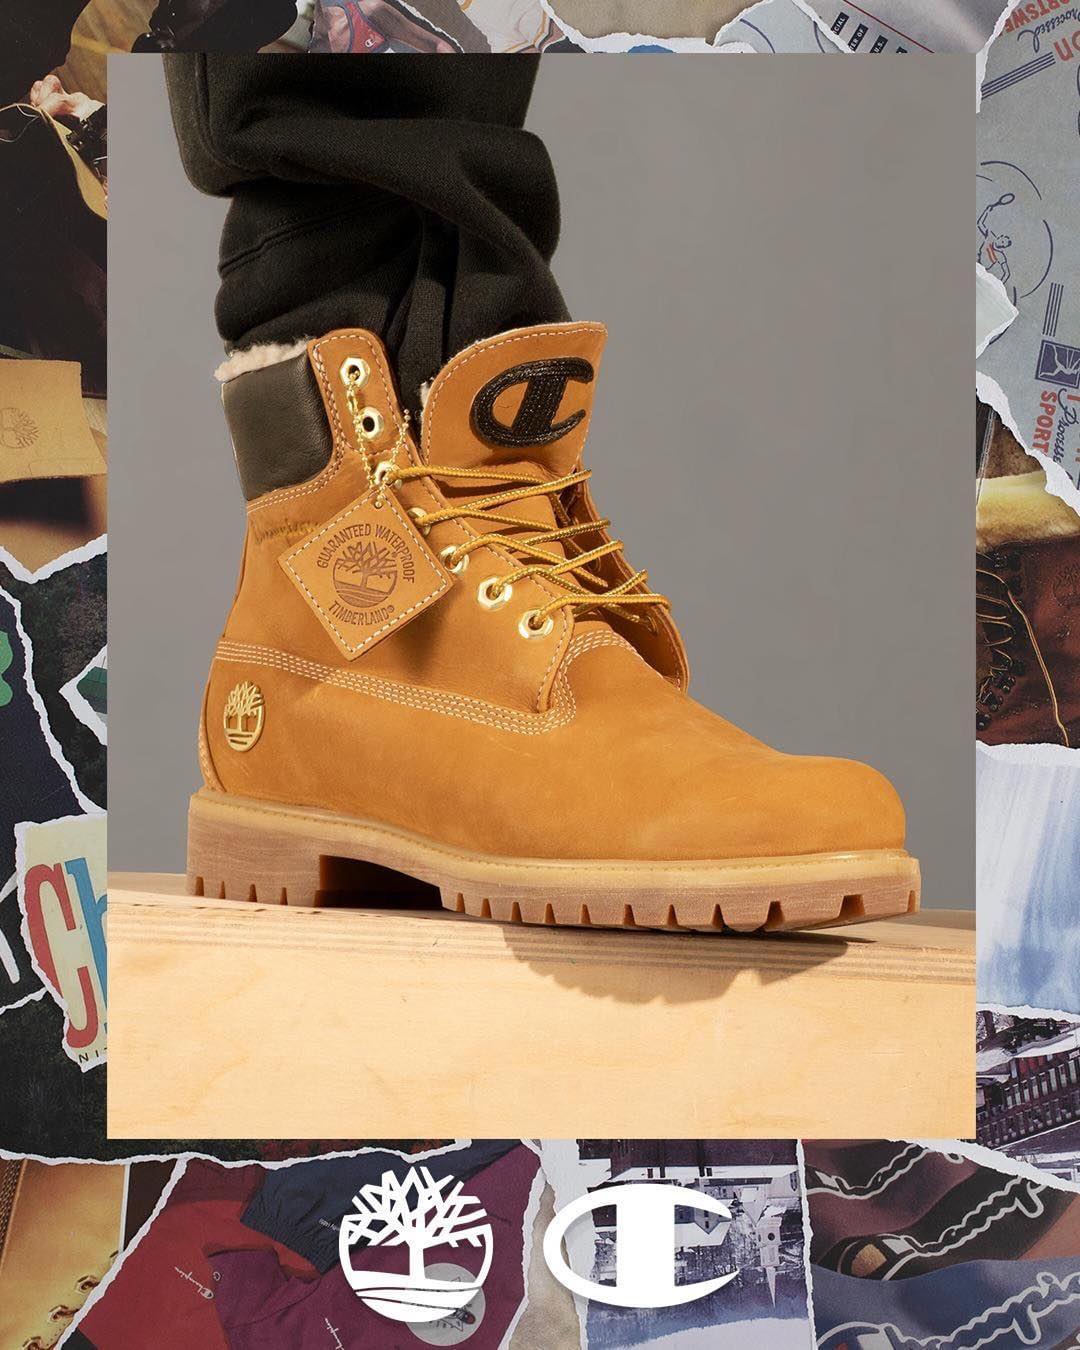 Kicks Deals Canada on Twitter: "The new Champion x Timberland 6" Premium boot is now at Foot Locker for $230 with free shipping in two colours. https://t.co/rygQvonx6g https://t.co/iLPrqRJp1Y" Twitter